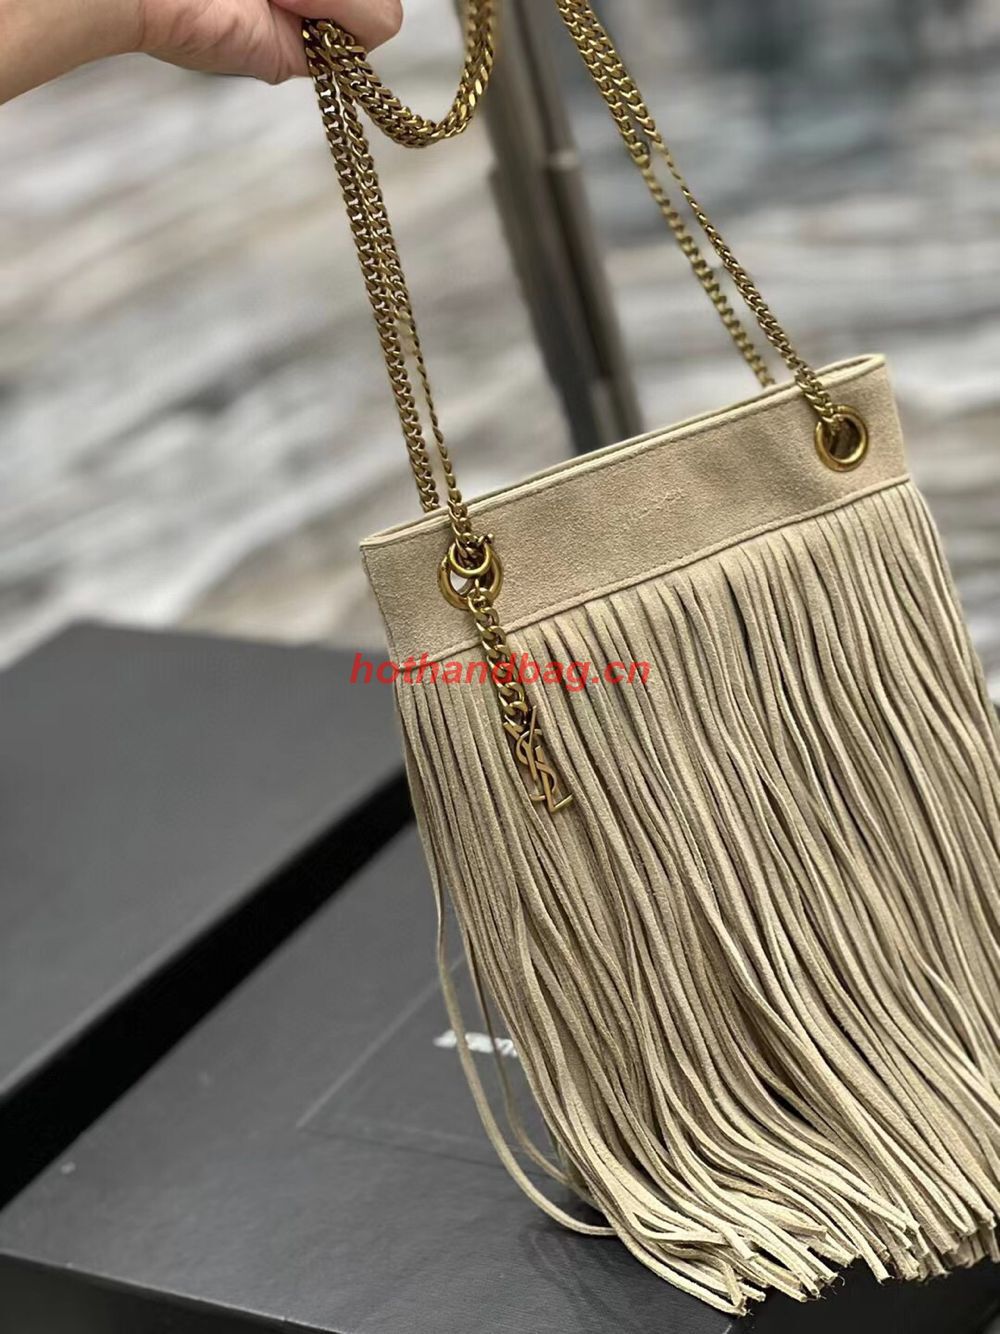 SAINT LAURENT SMALL CHAIN BAG IN LIGHT SUEDE WITH FRINGES 683378 GRAY